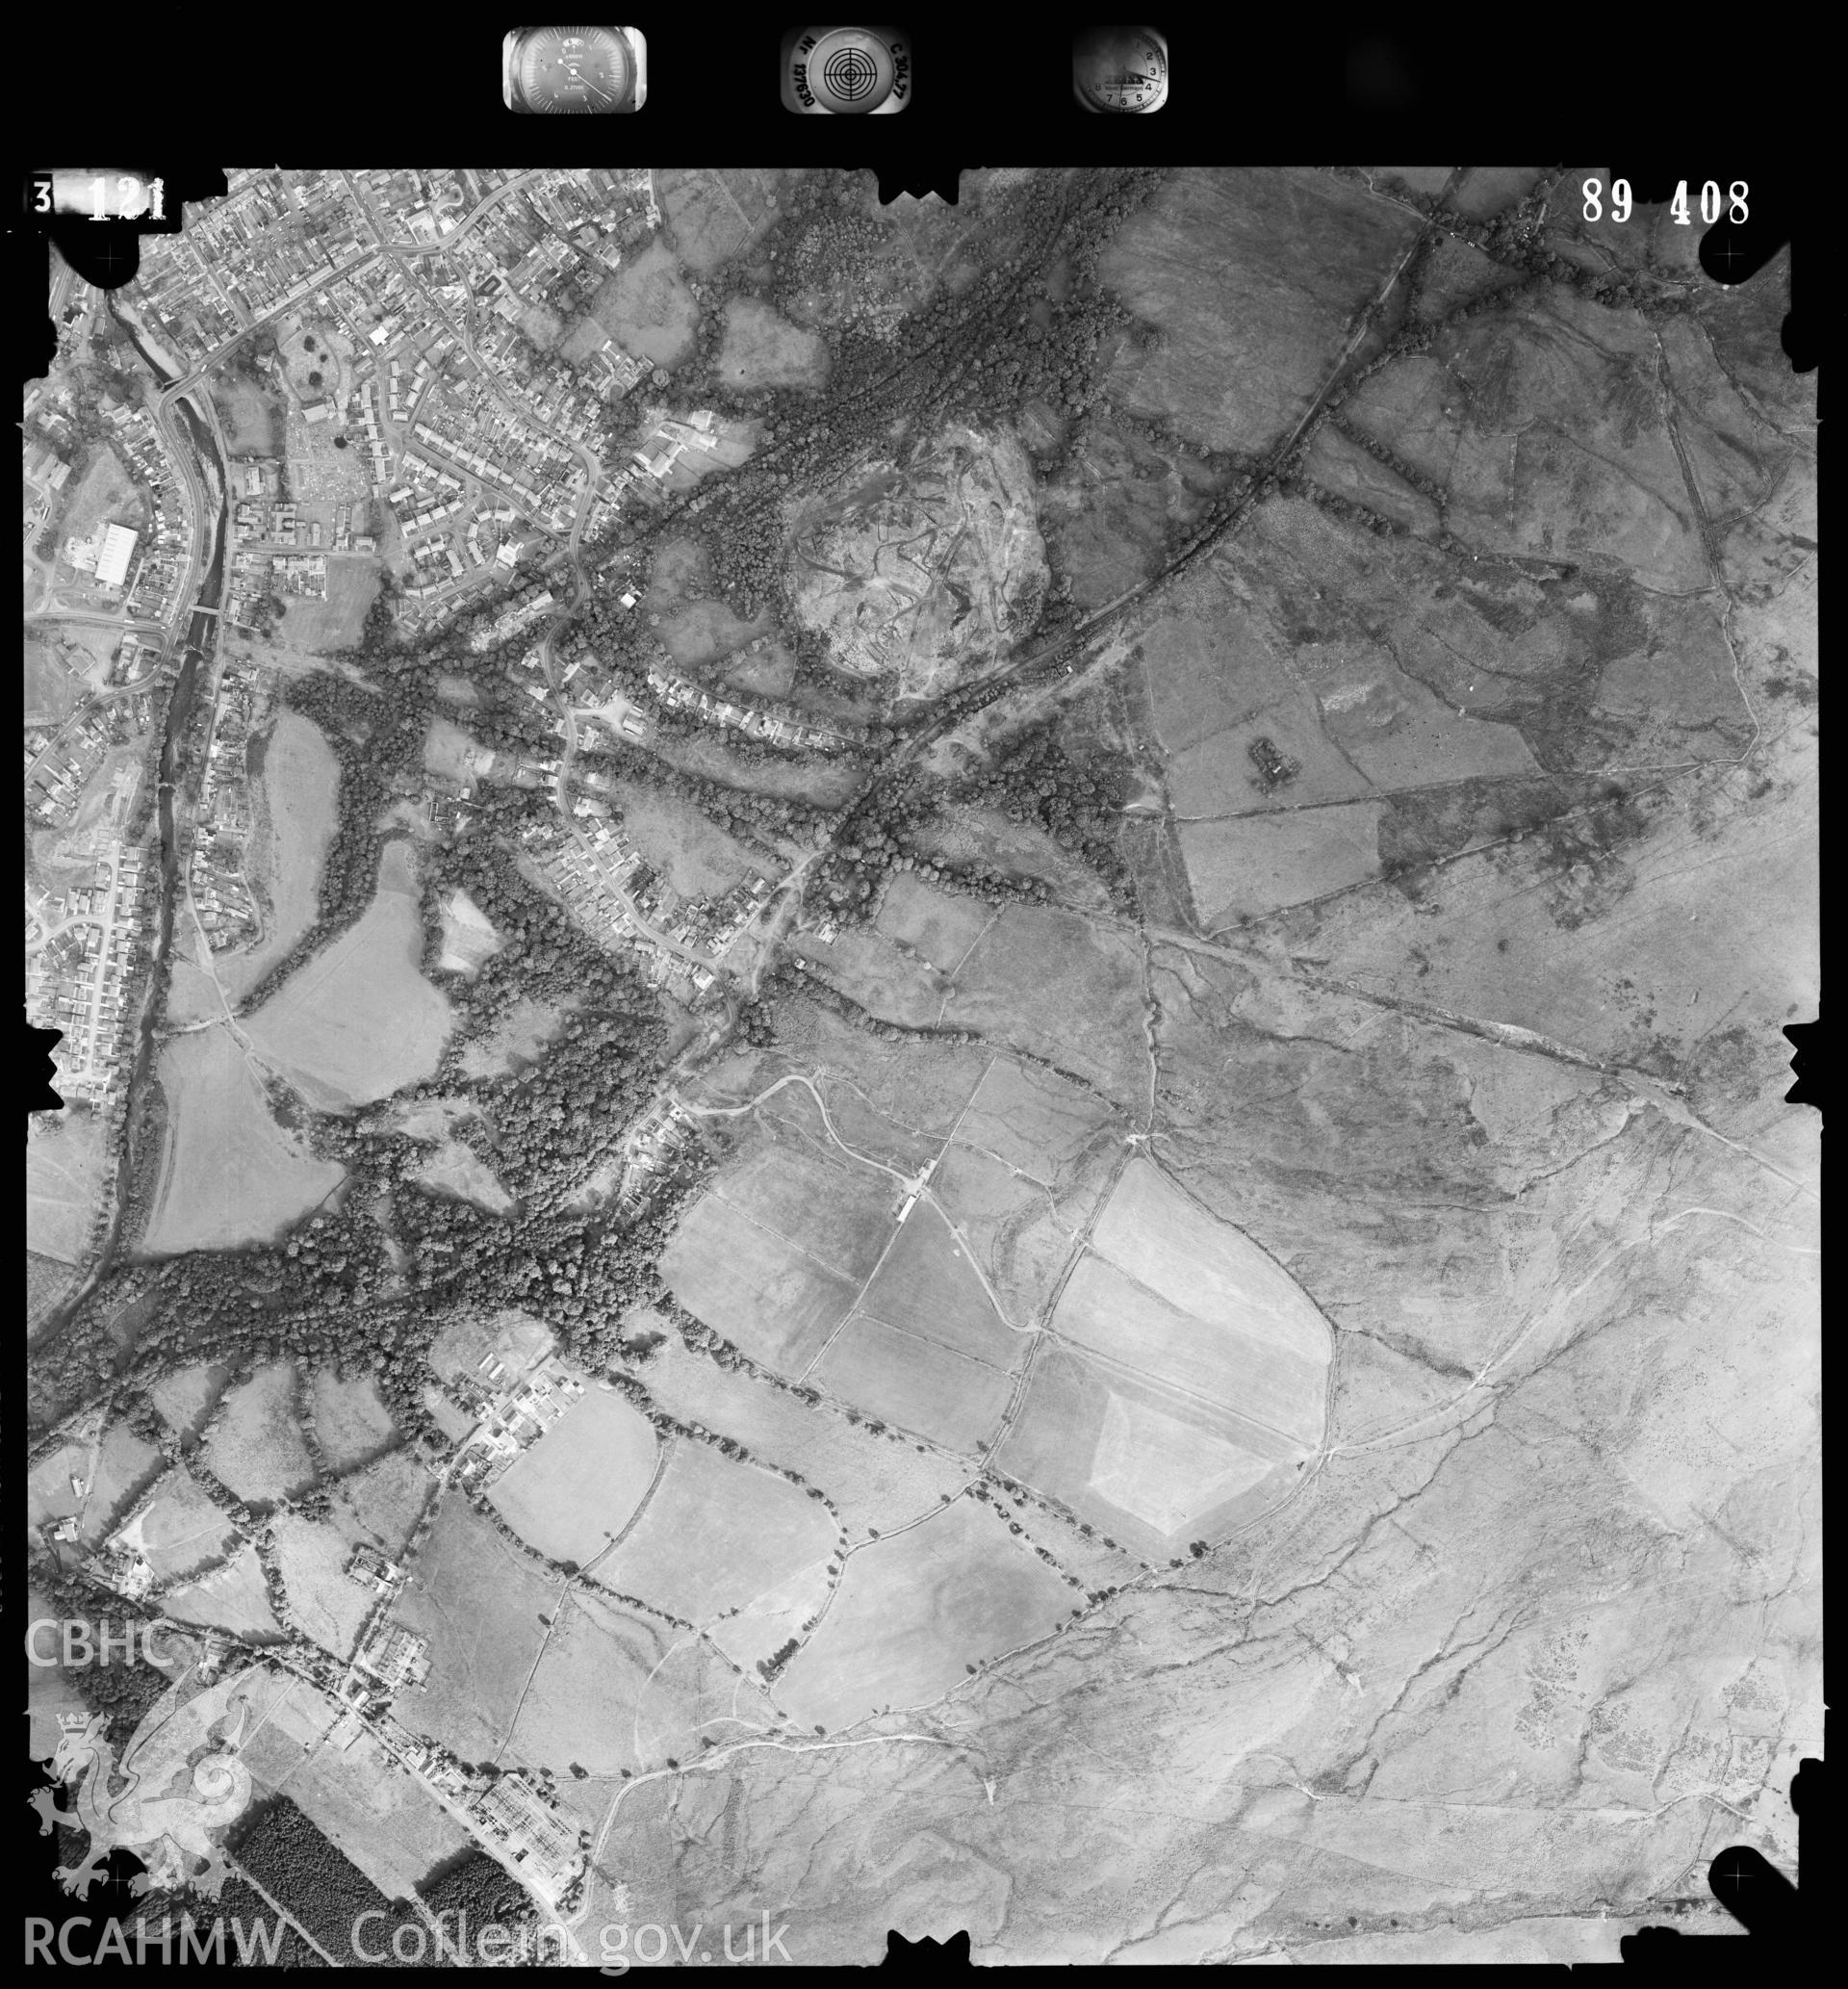 Digitized copy of an aerial photograph showing the Ystradgynlais area,  taken by Ordnance Survey, 1989.